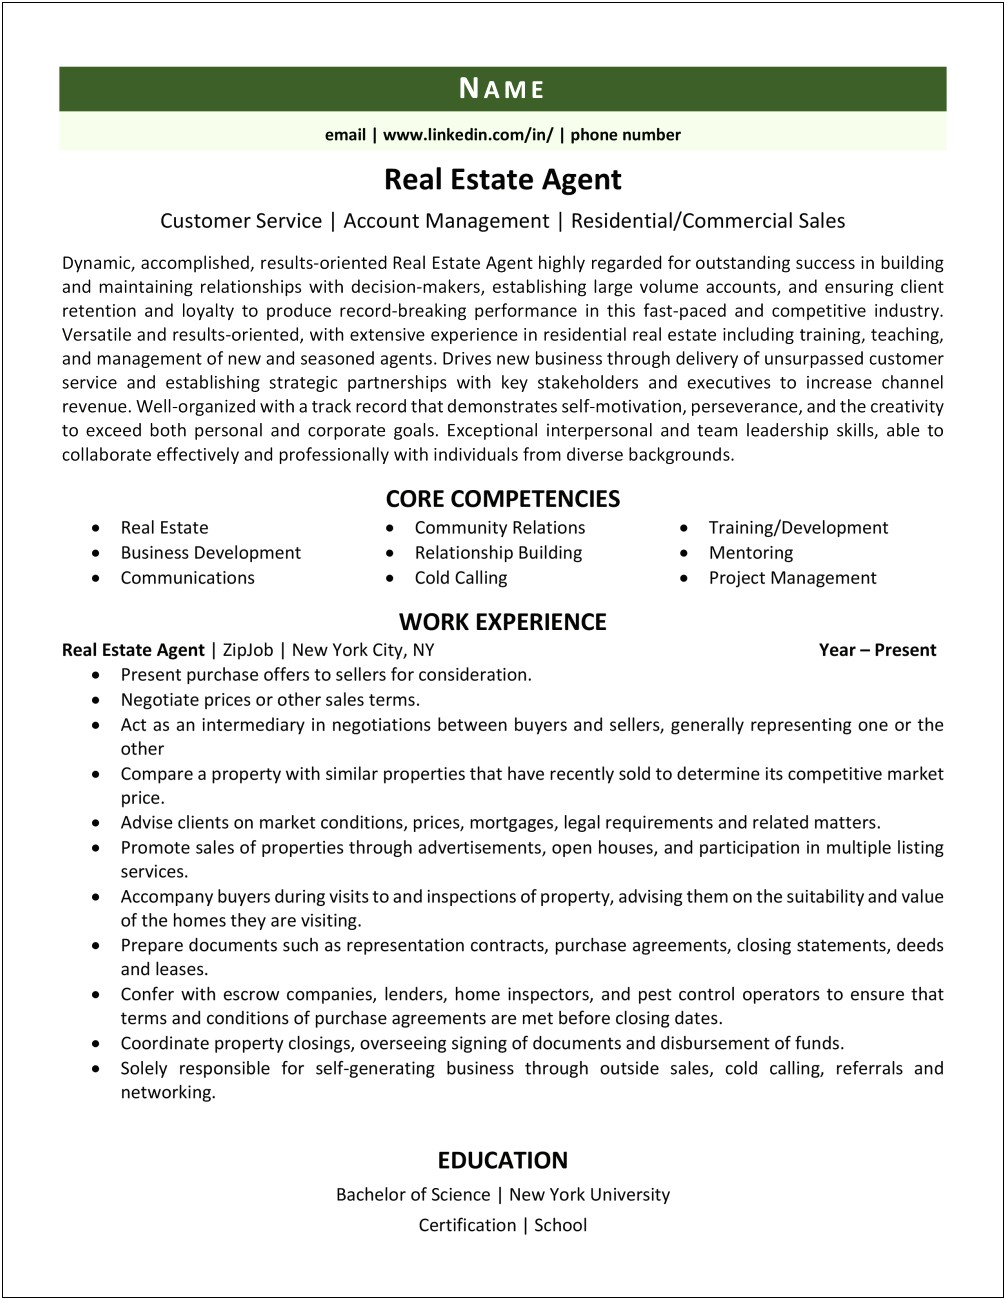 Add Real Estate Agent To A Resumes Experience